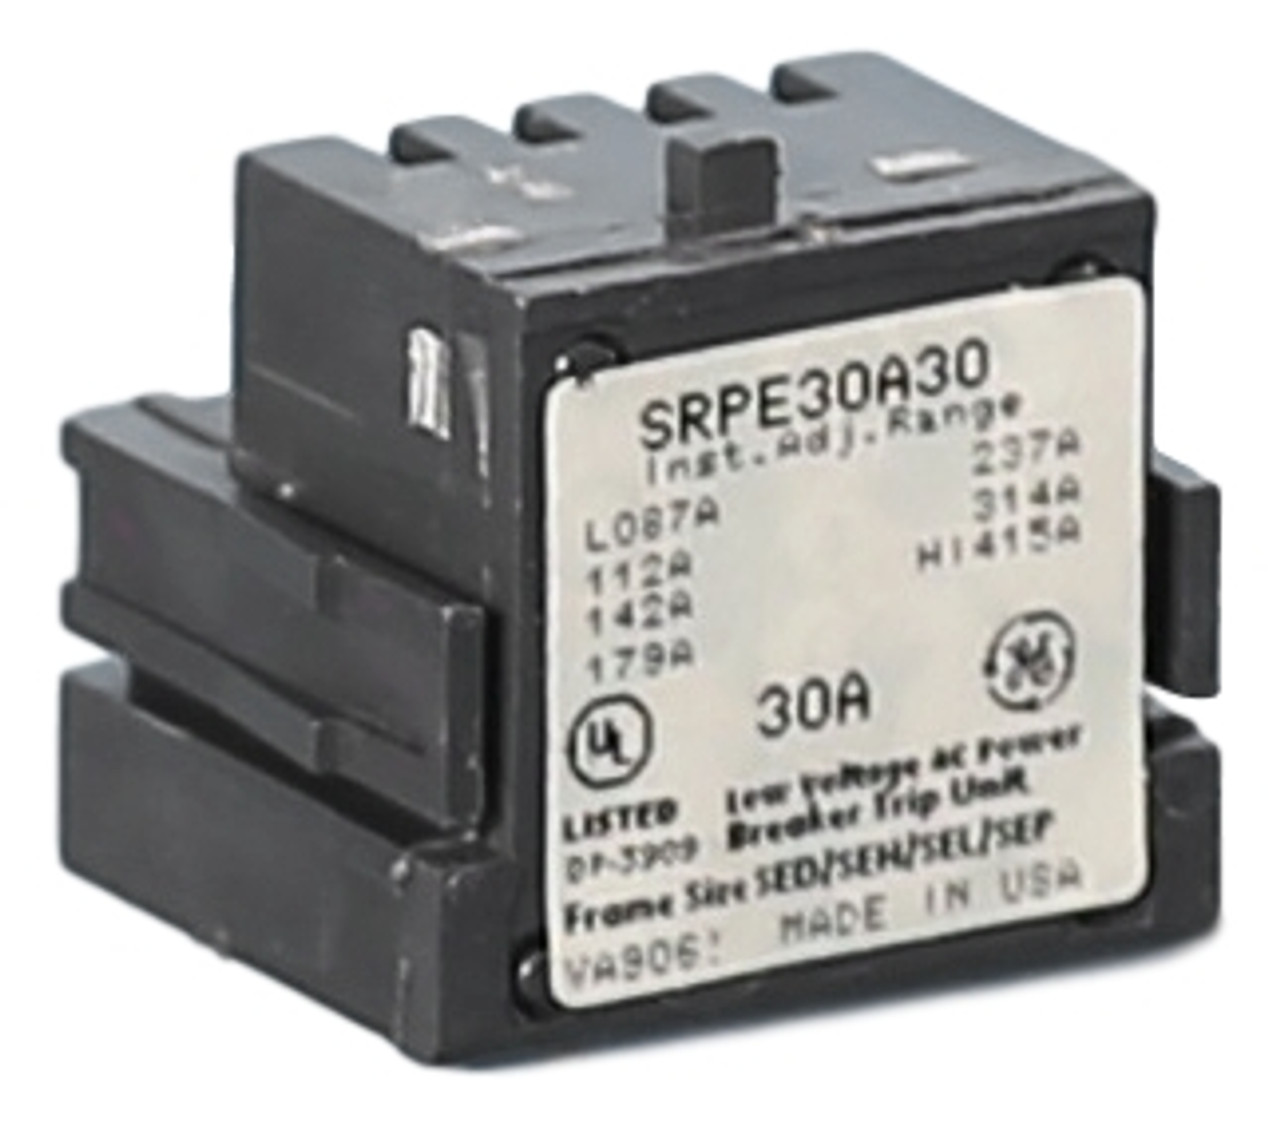 SRPE30A20
20 Amp Plug
(Picture shown is typical for all amps)